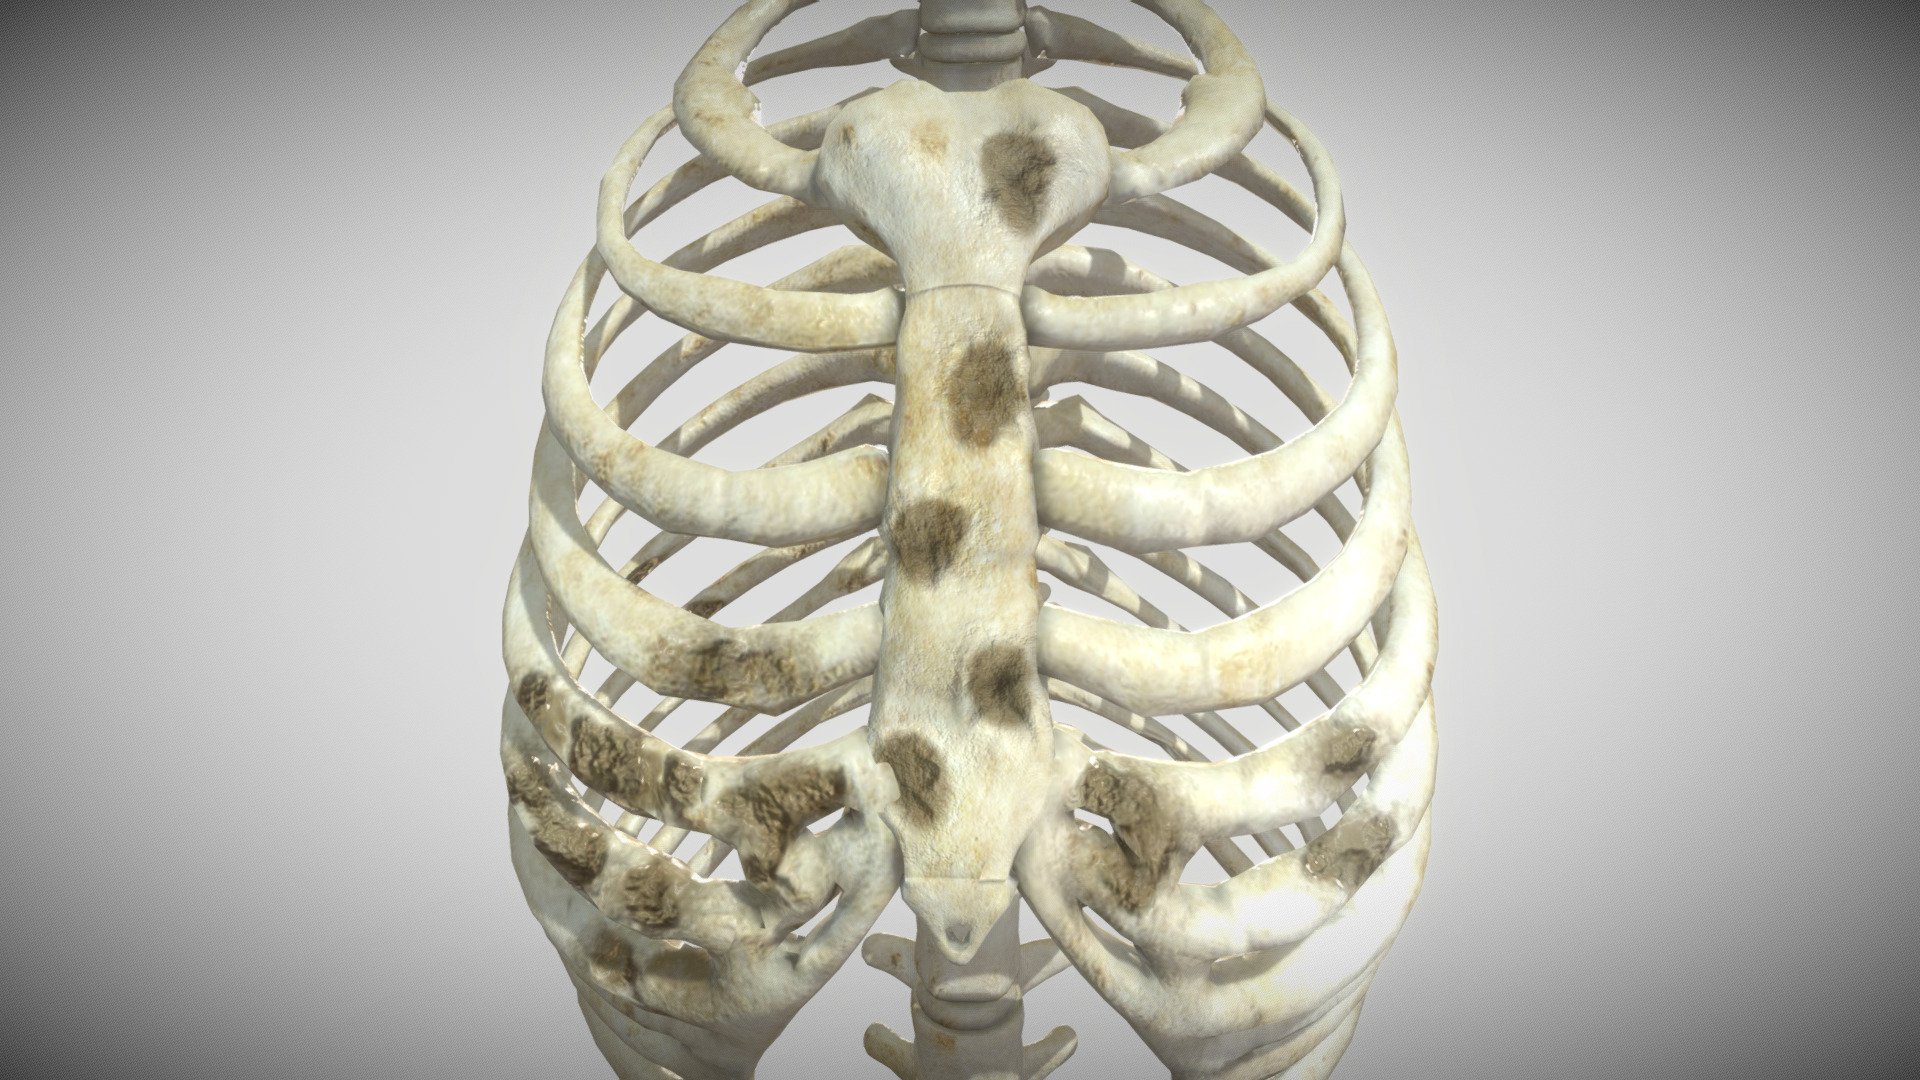 -In skeletal tumors, metastatic bone tumors have the most common occurrence [1] and primary bone tumors of chest wall accounts for only 5 - 8 % of all bony tumors.
-Of these approximately 95% occur in ribs and remainder in the sternum.

Reference :-
https://www.fortunejournals.com/articles/expansile-lytic-lesions-of-rib-two-rare-case-reports.html - Lytic Lesions of Rib - Buy Royalty Free 3D model by Ebers 3d model